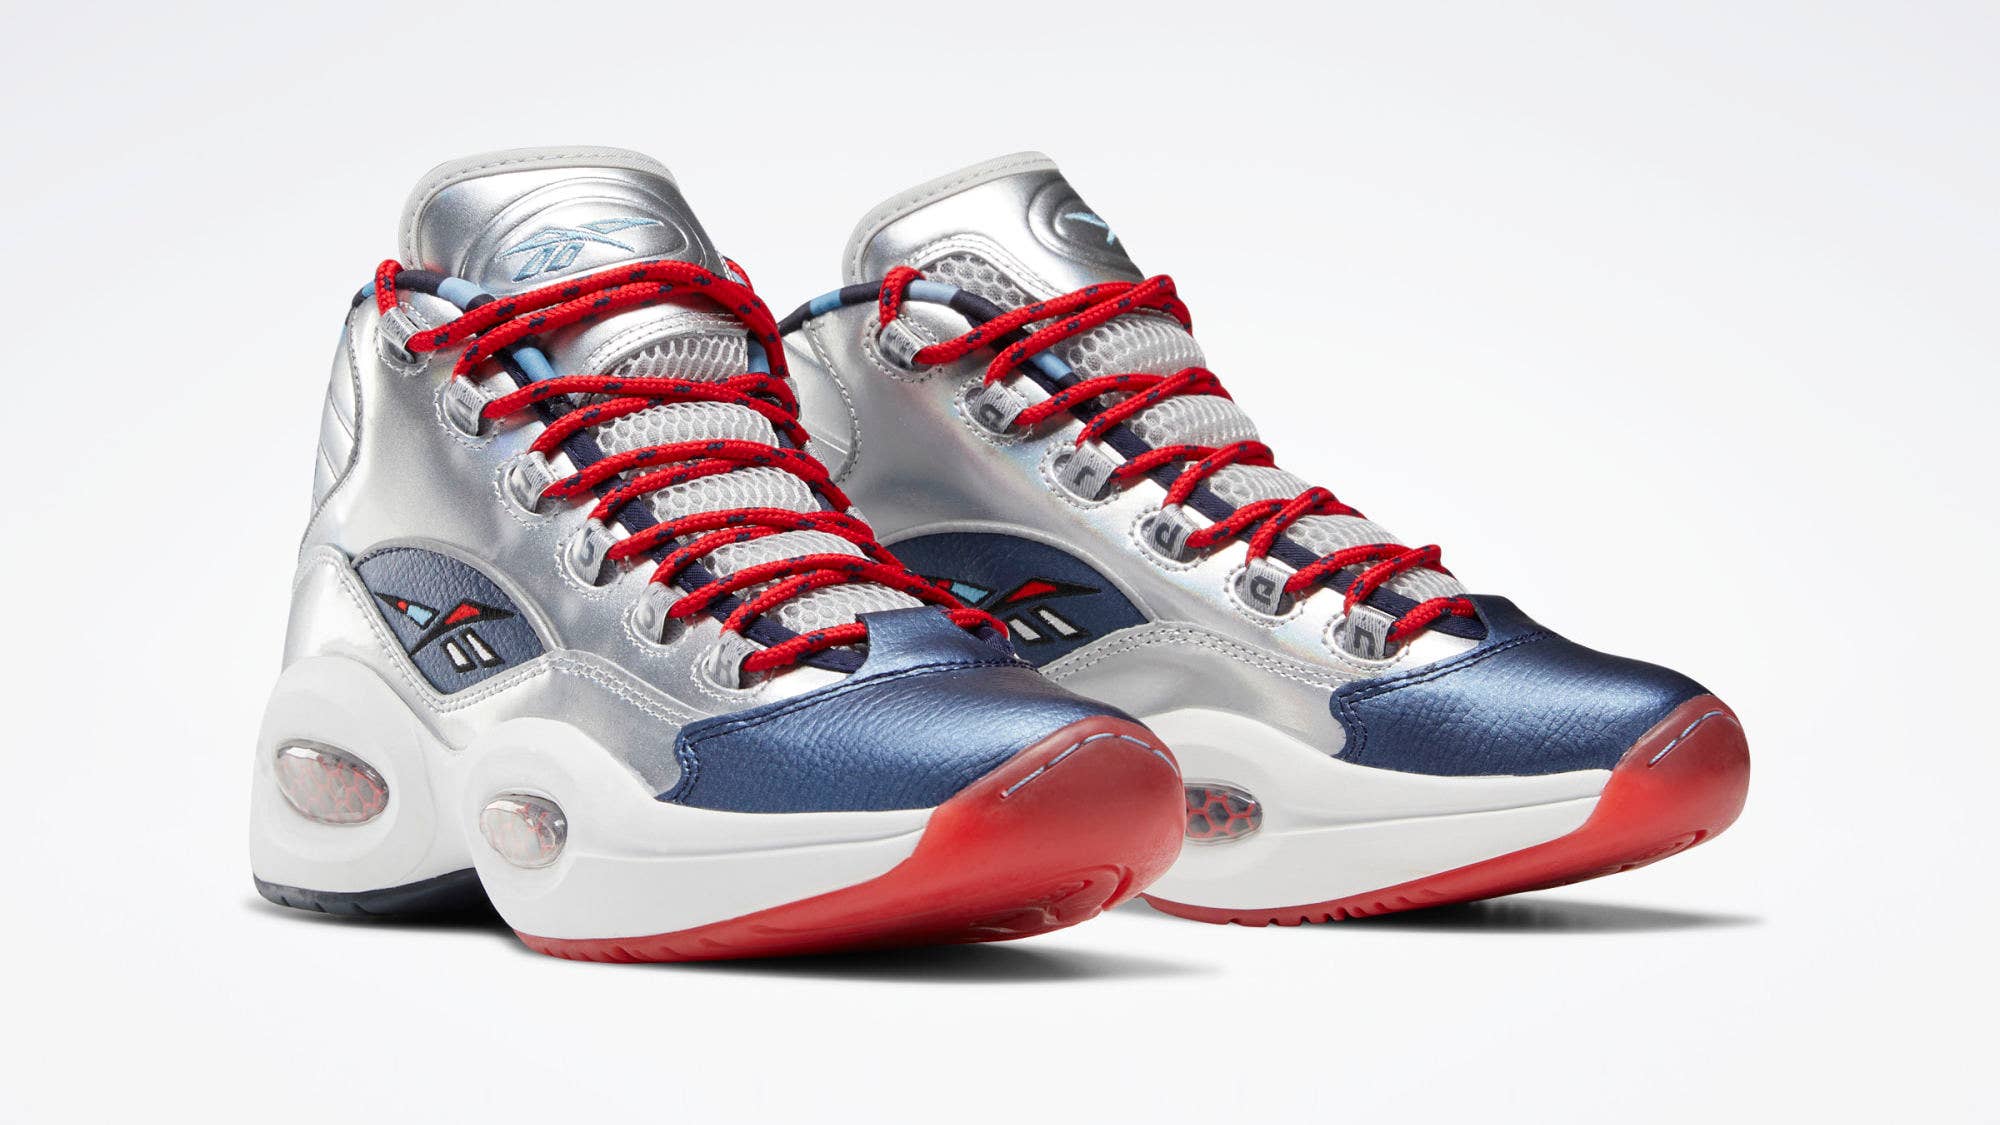 Reebok Question Mid 'Crossed Up, Step Back' FZ1366 Pair